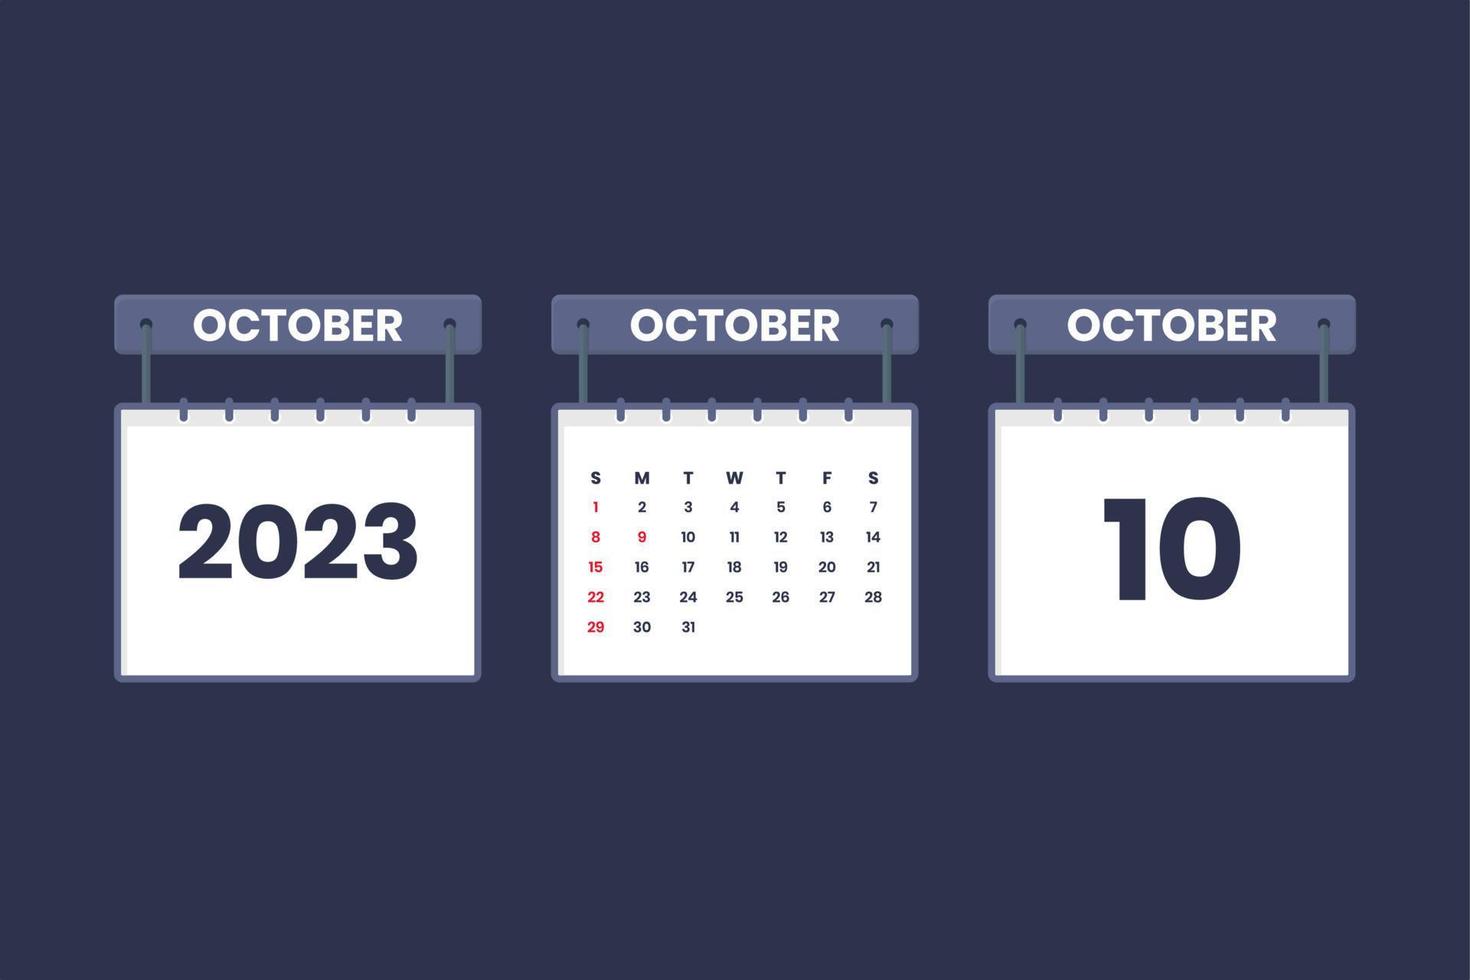 10 October 2023 calendar icon for schedule, appointment, important date concept vector